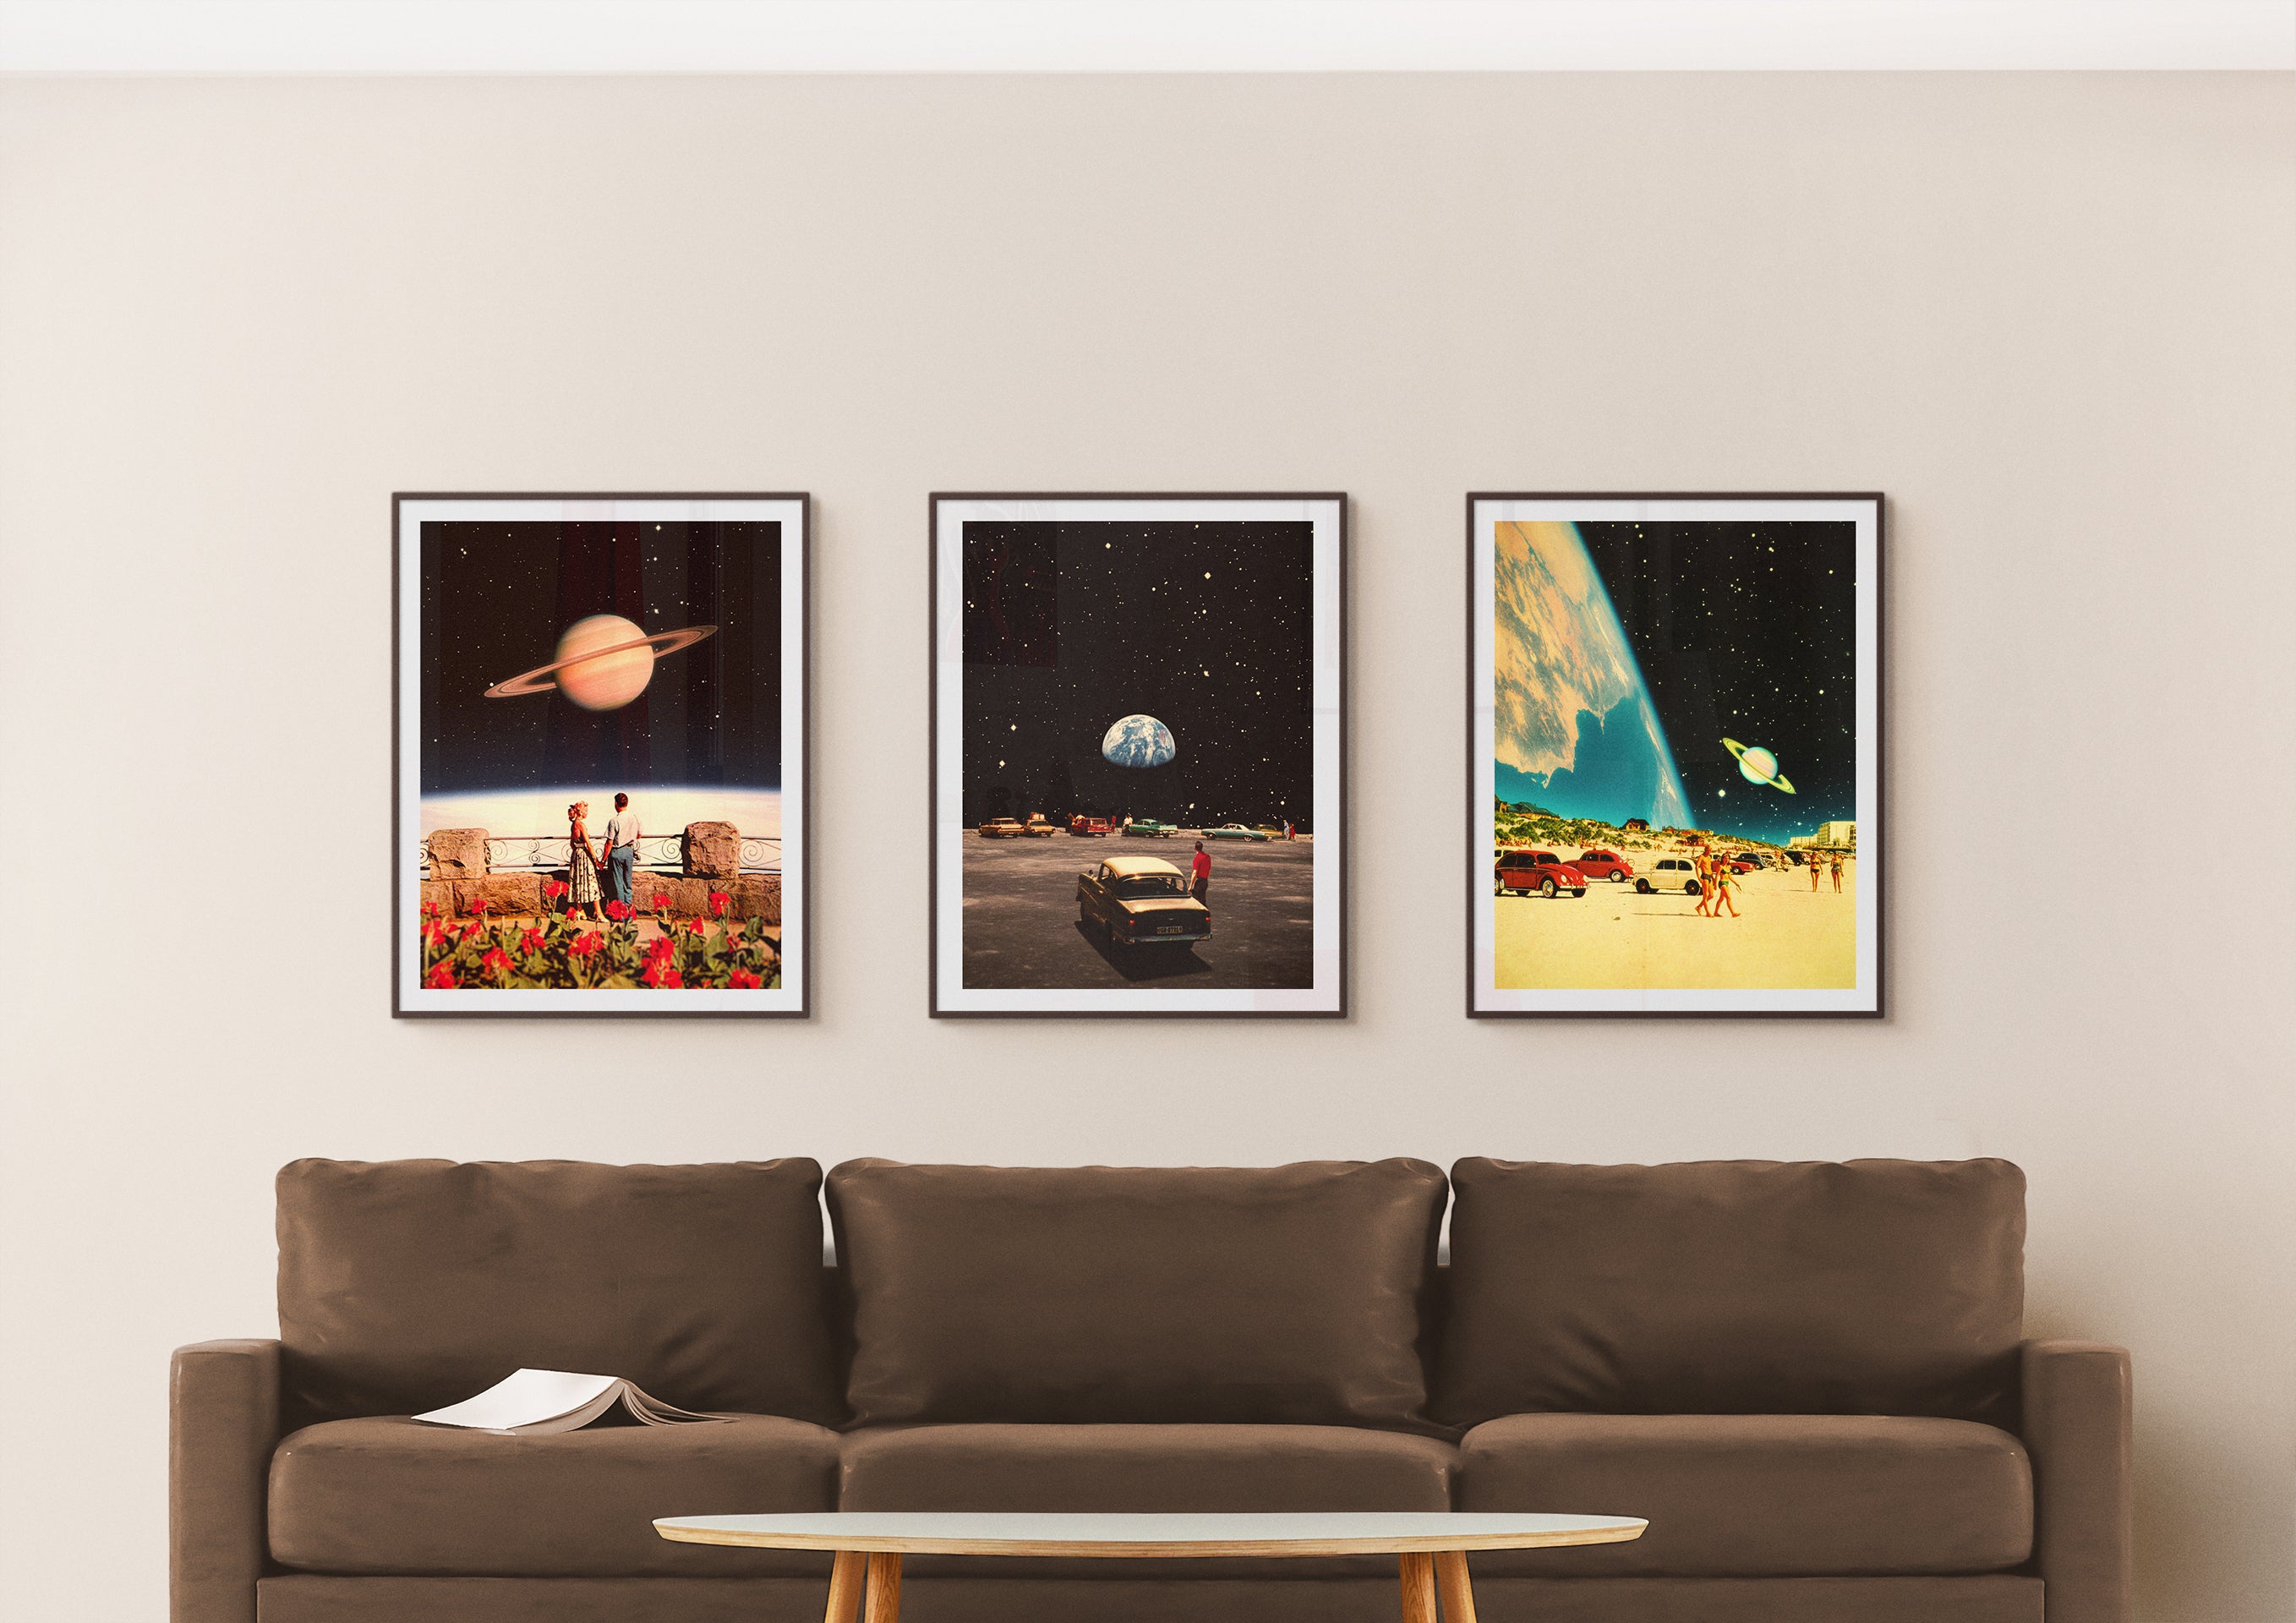 Three framed collage art posters hanging above a brown sofa.